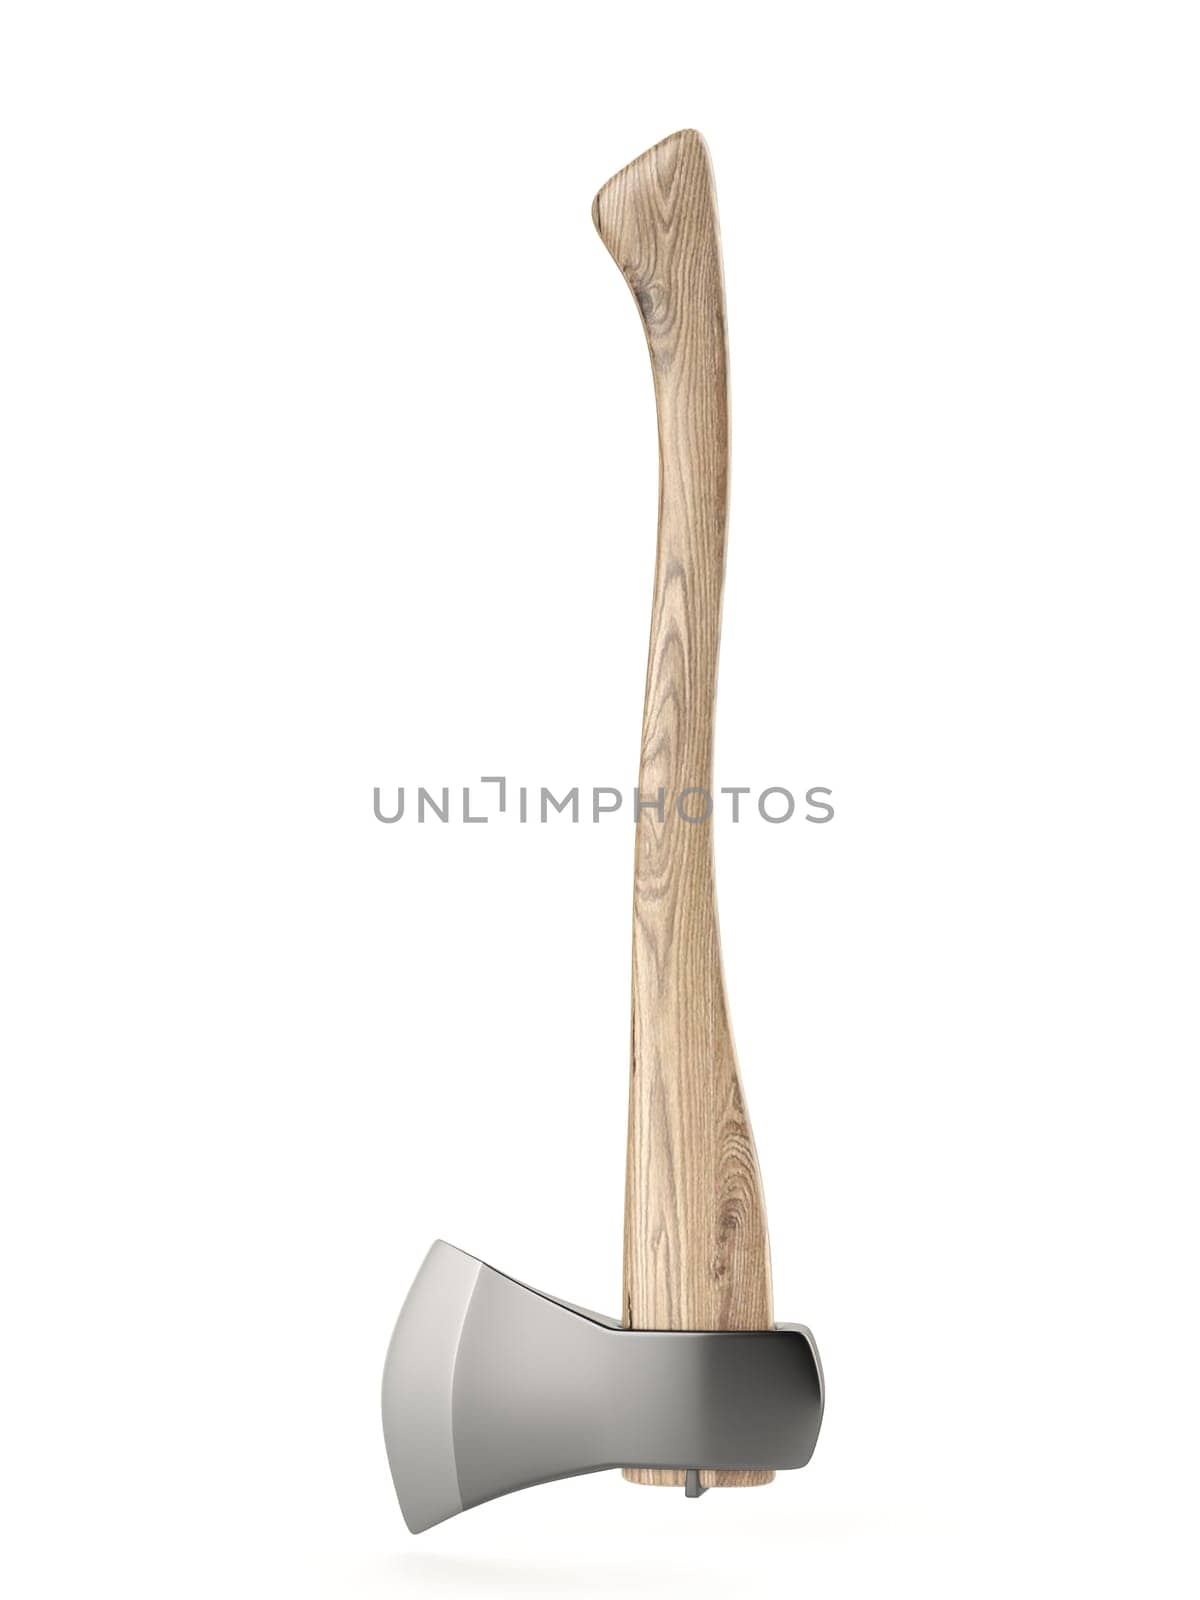 Hand tools axe 3D rendering illustration isolated on white background